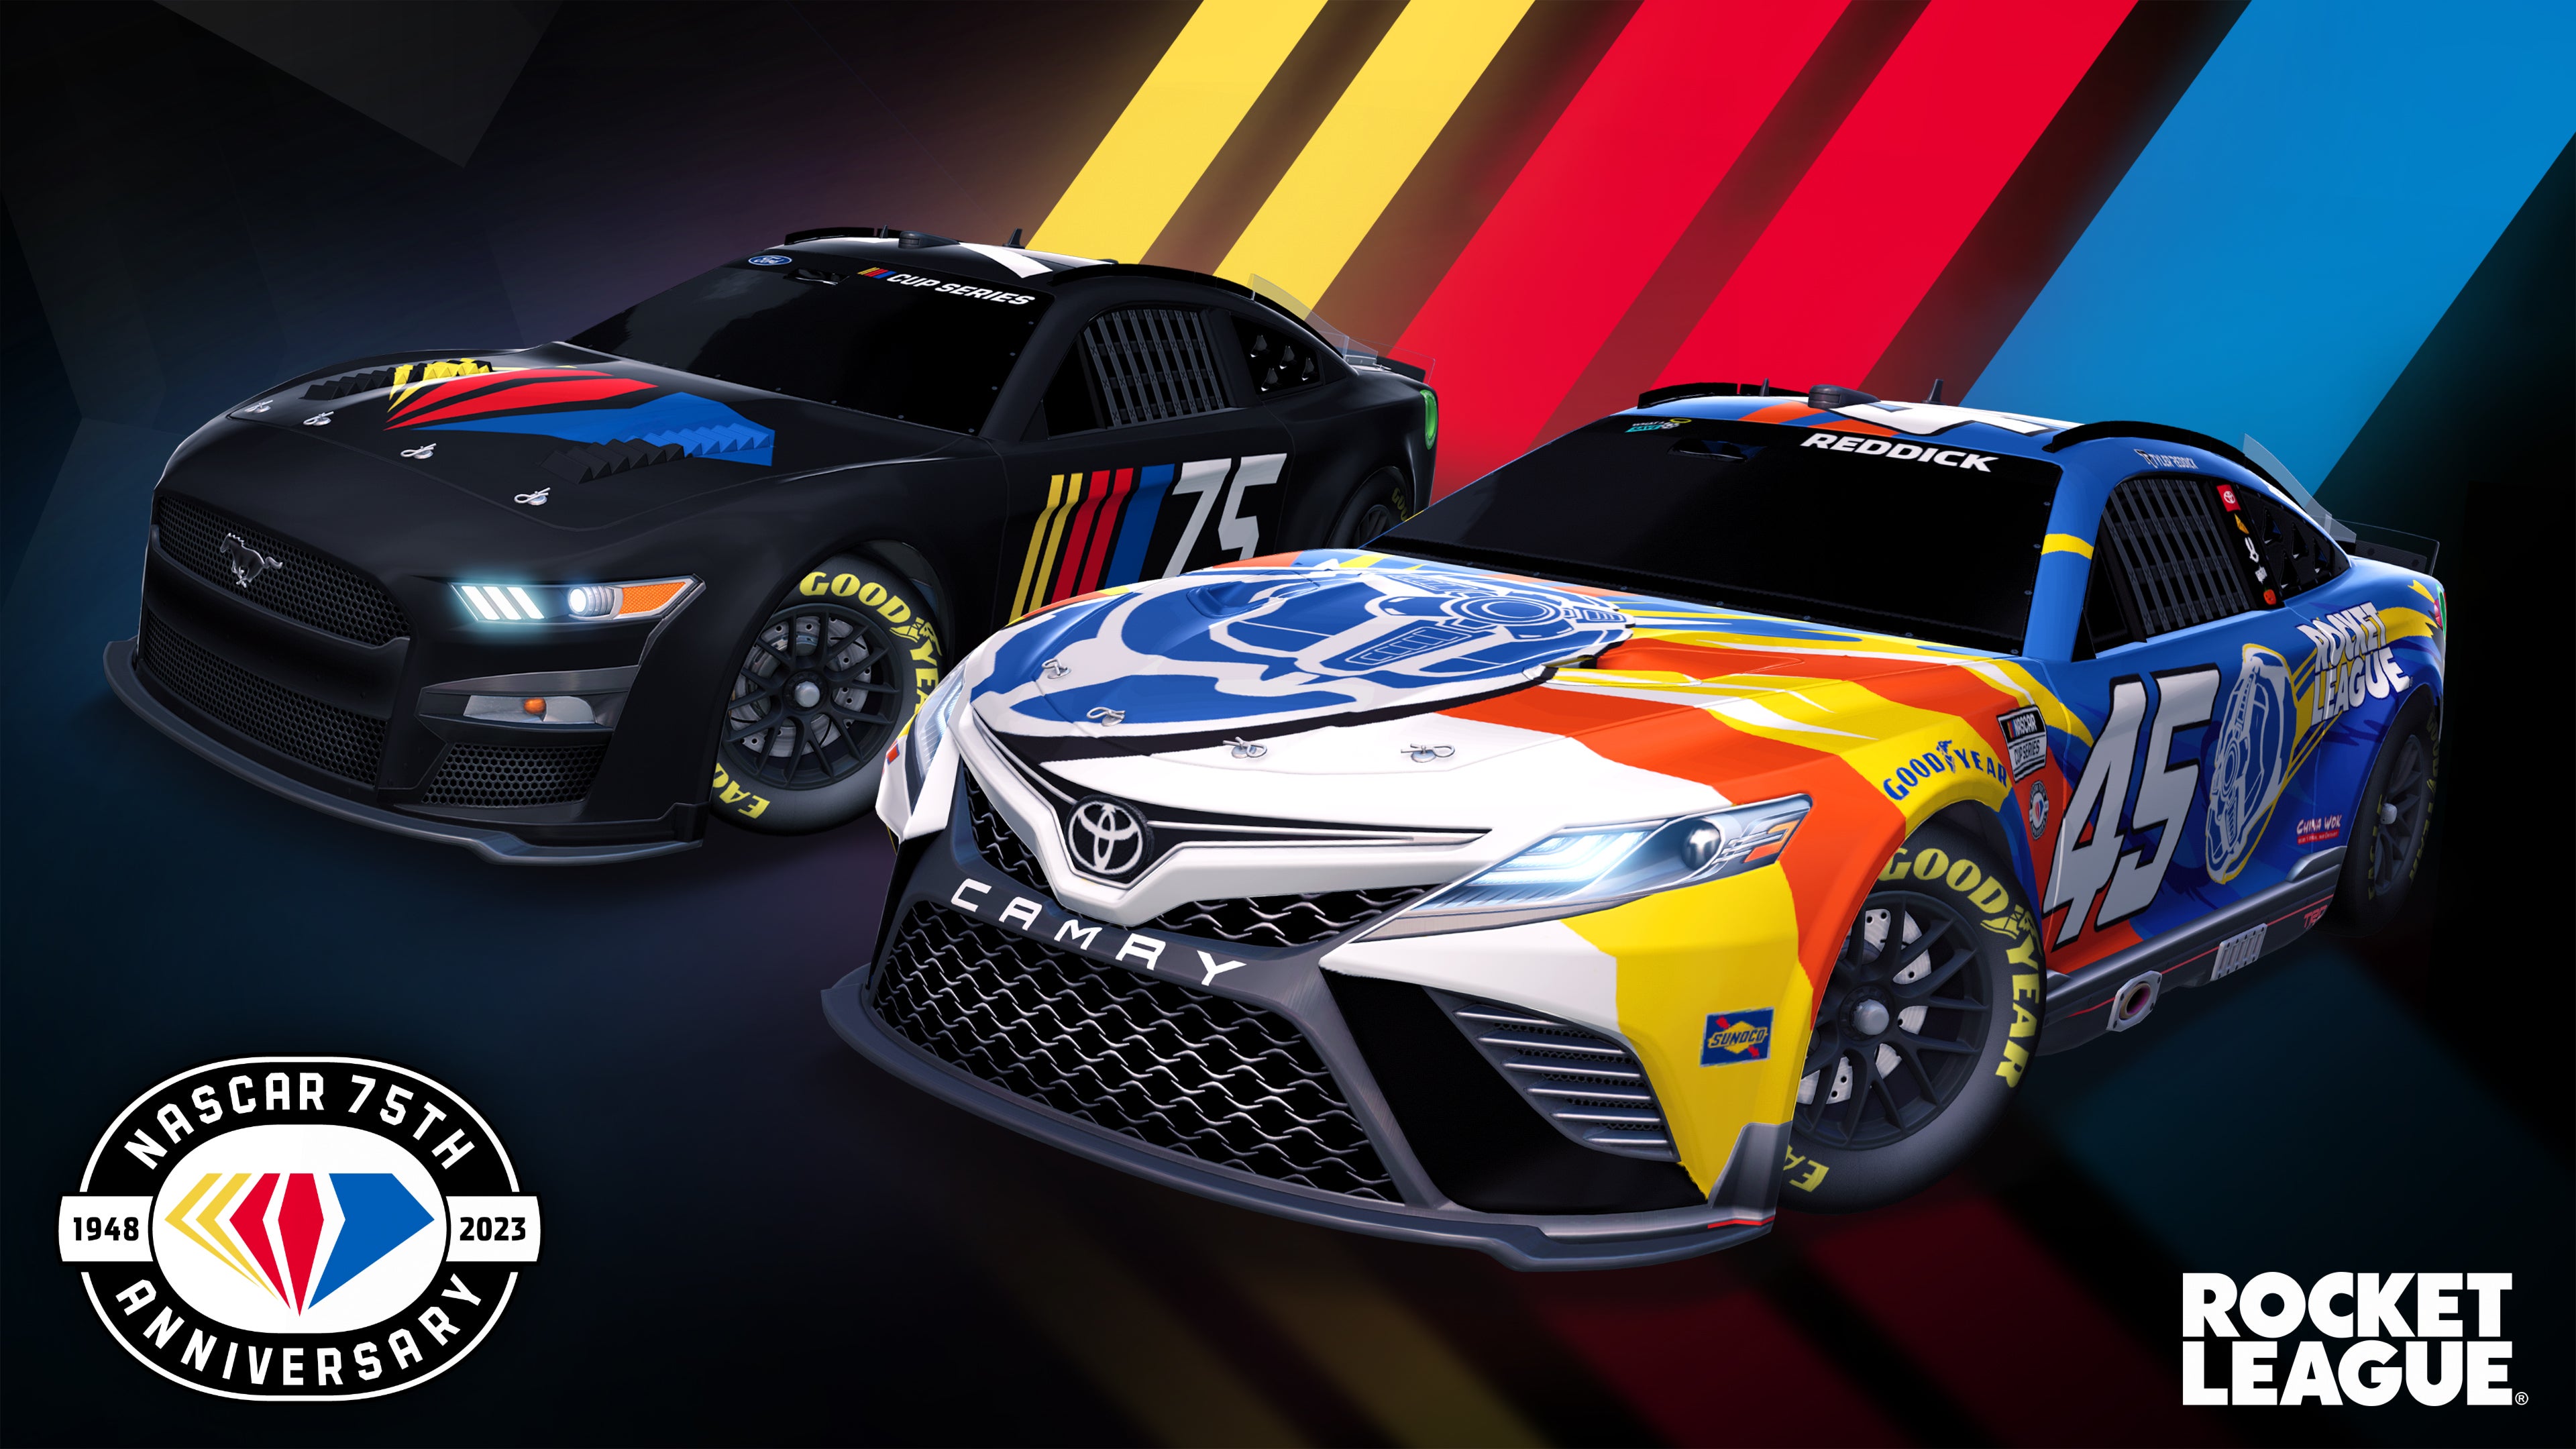 Race with NASCARs 75th Anniversary and IRL Rocket League Car Rocket League®